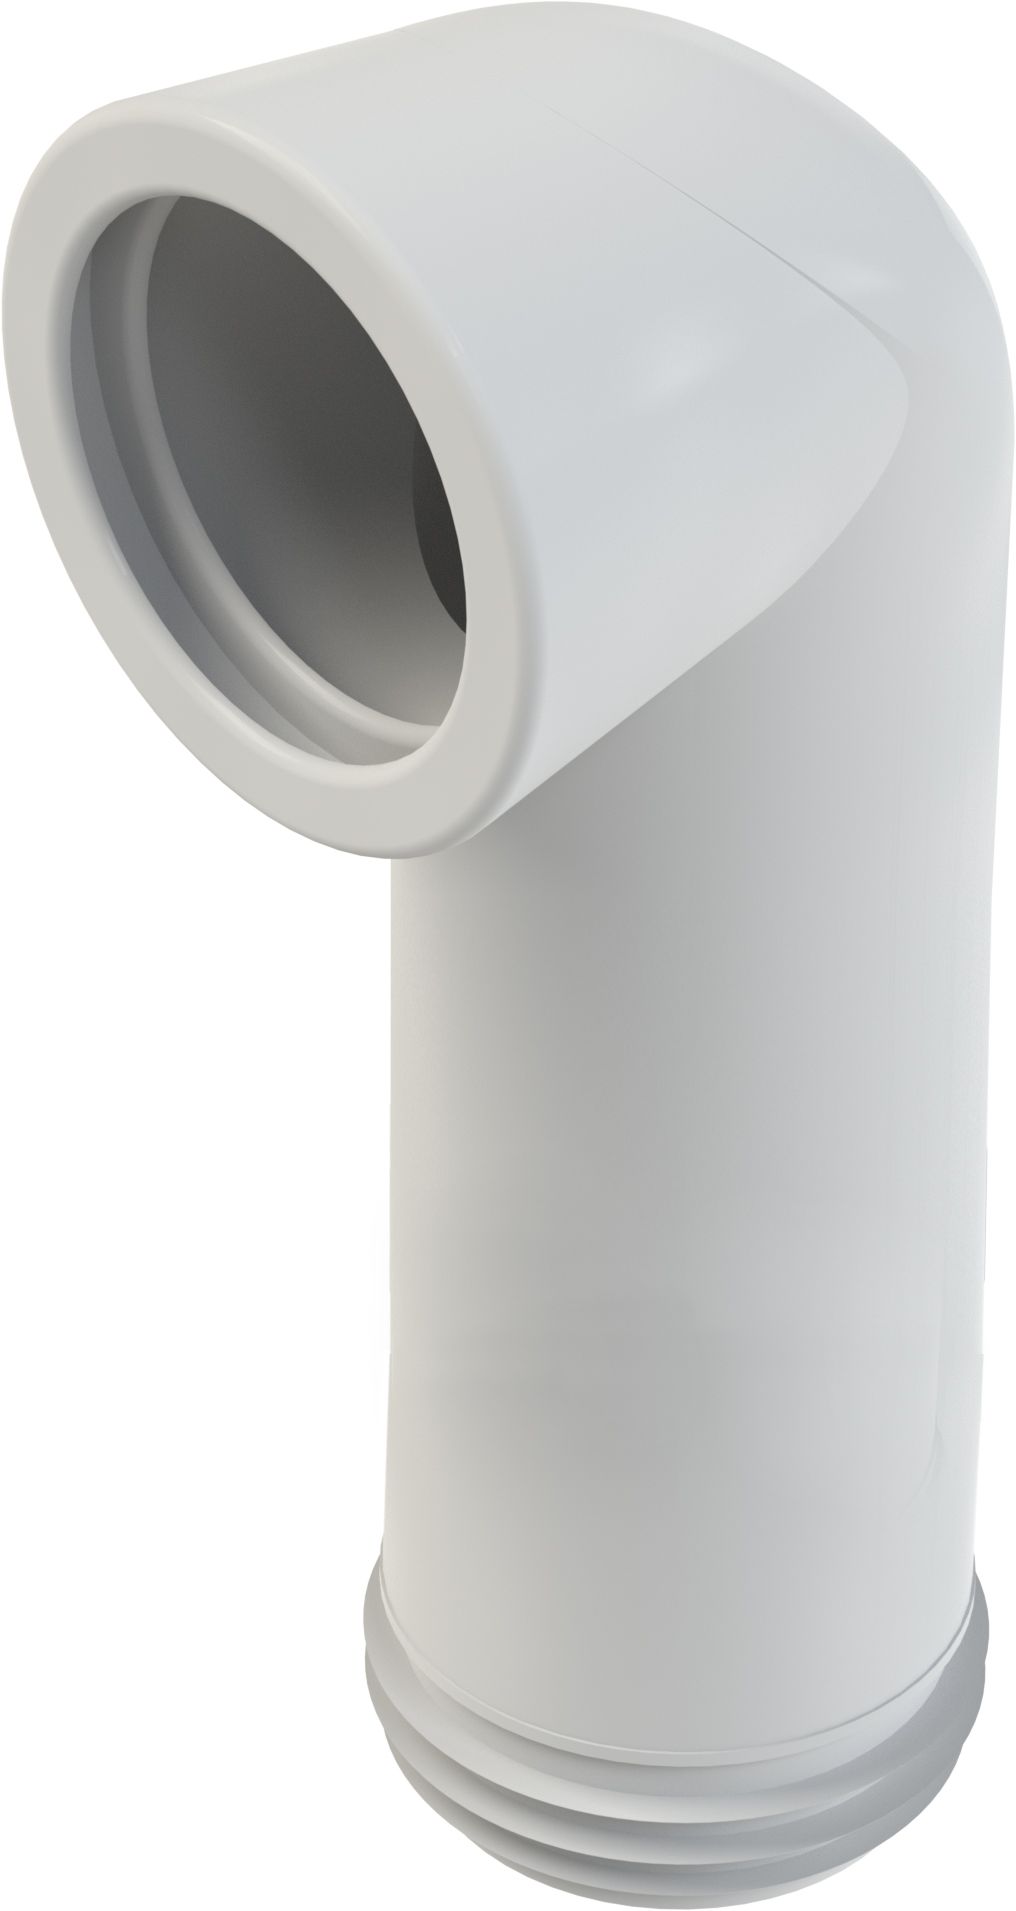 WC discharge elbow 303E